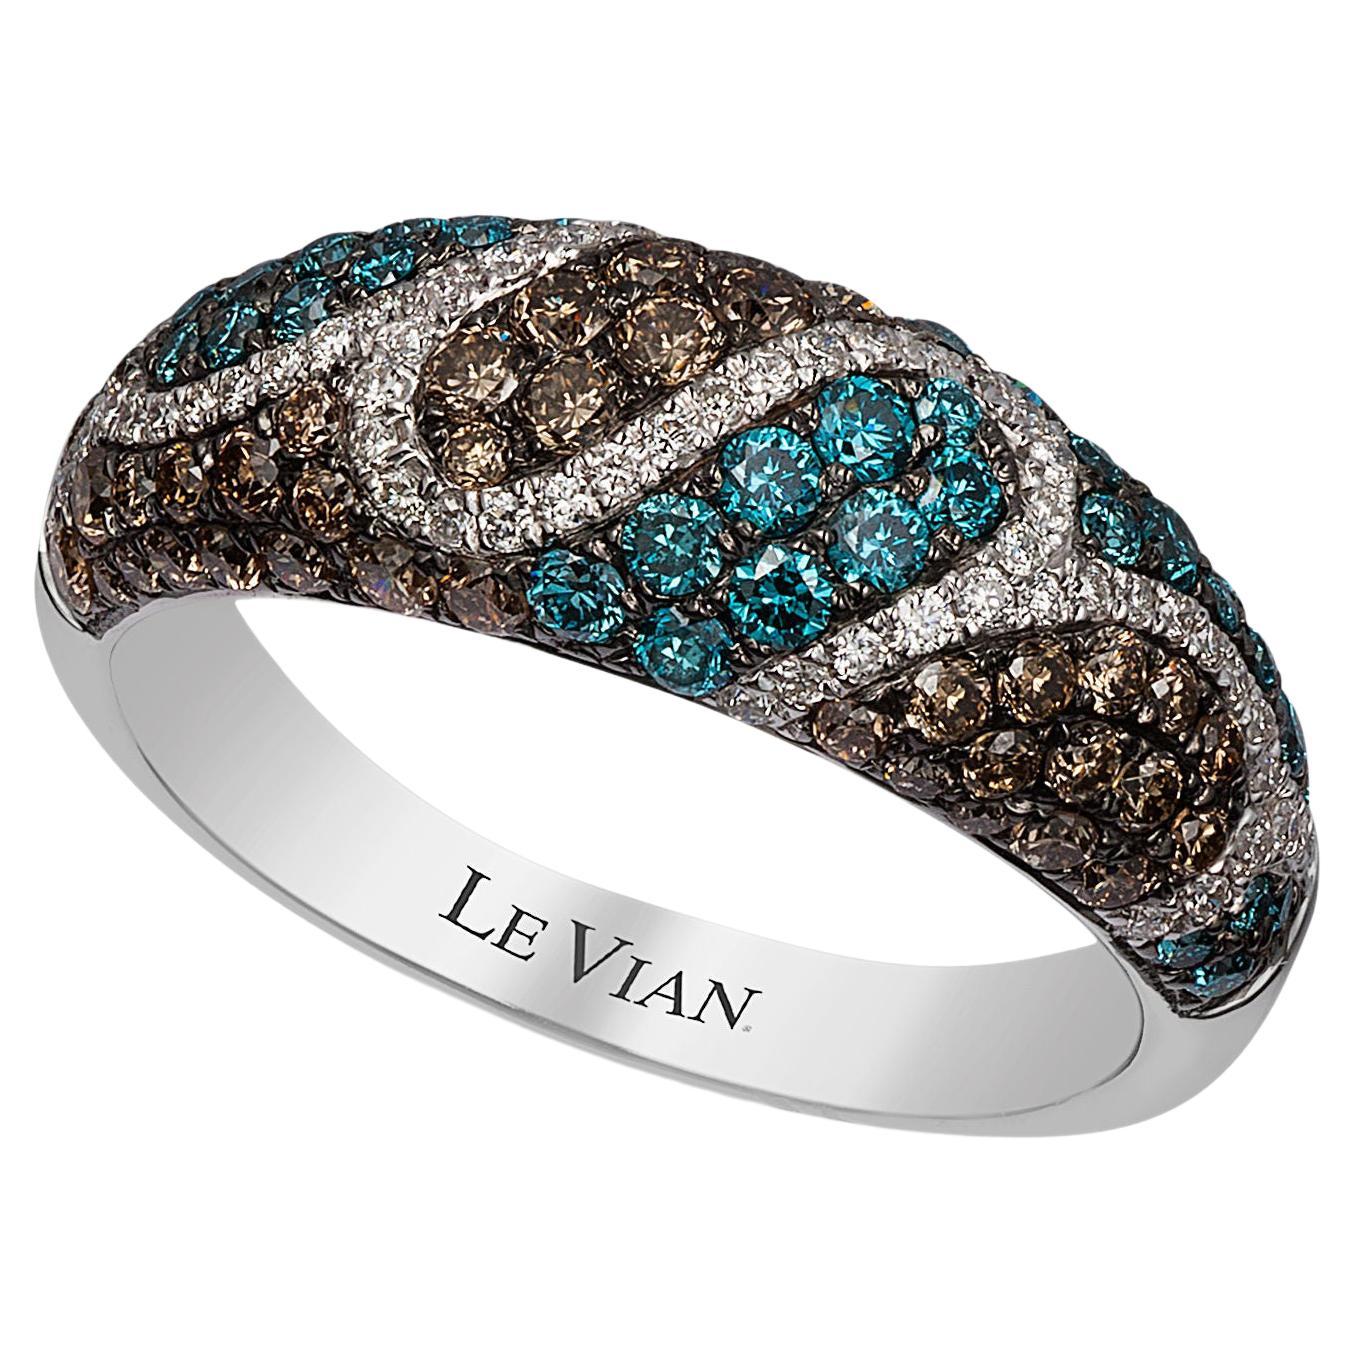 Le Vian Ring Blue, Chocolate, and White Diamonds Set in 14K White Gold For Sale